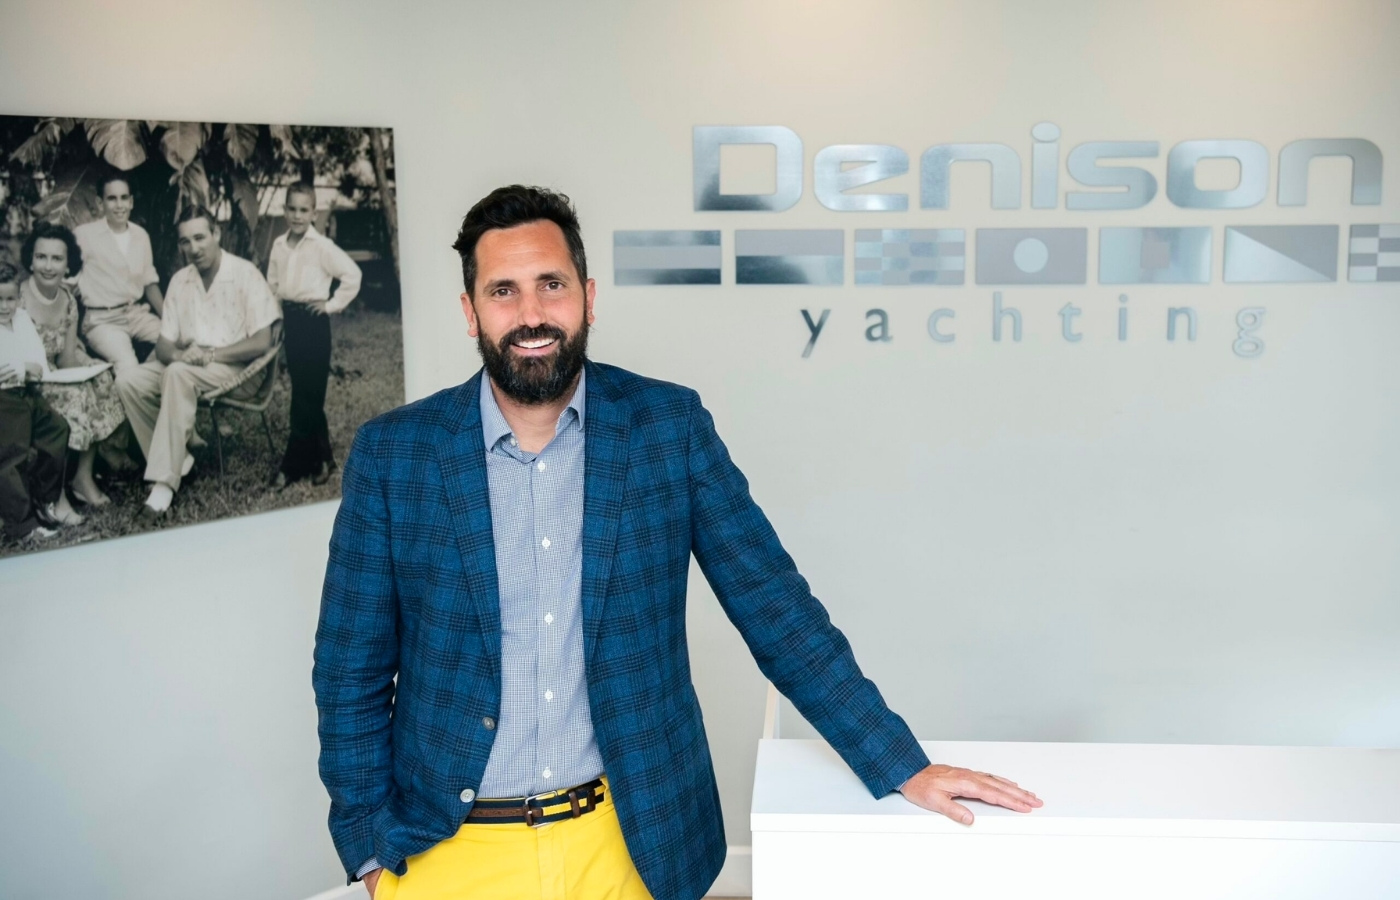 Denison Yachting shares insights from MYS 2021 [In the News]